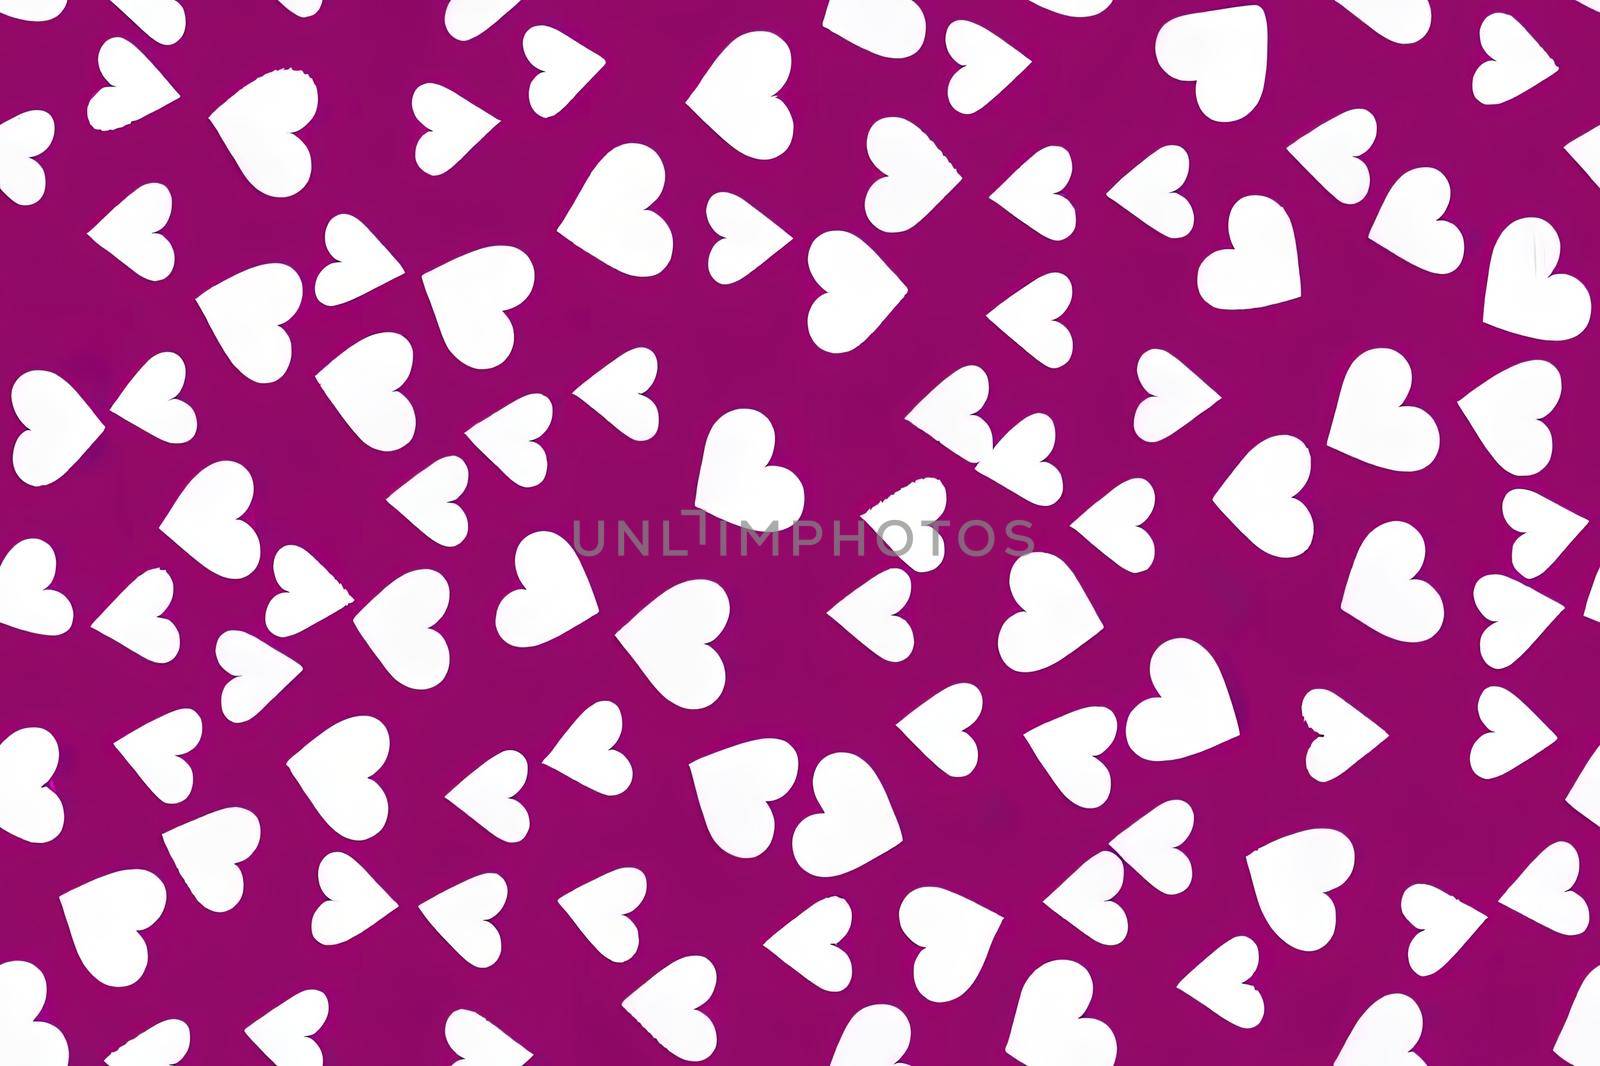 2d white fluffy heart seamless pattern isolated on pink High quality 2d illustration. by 2ragon